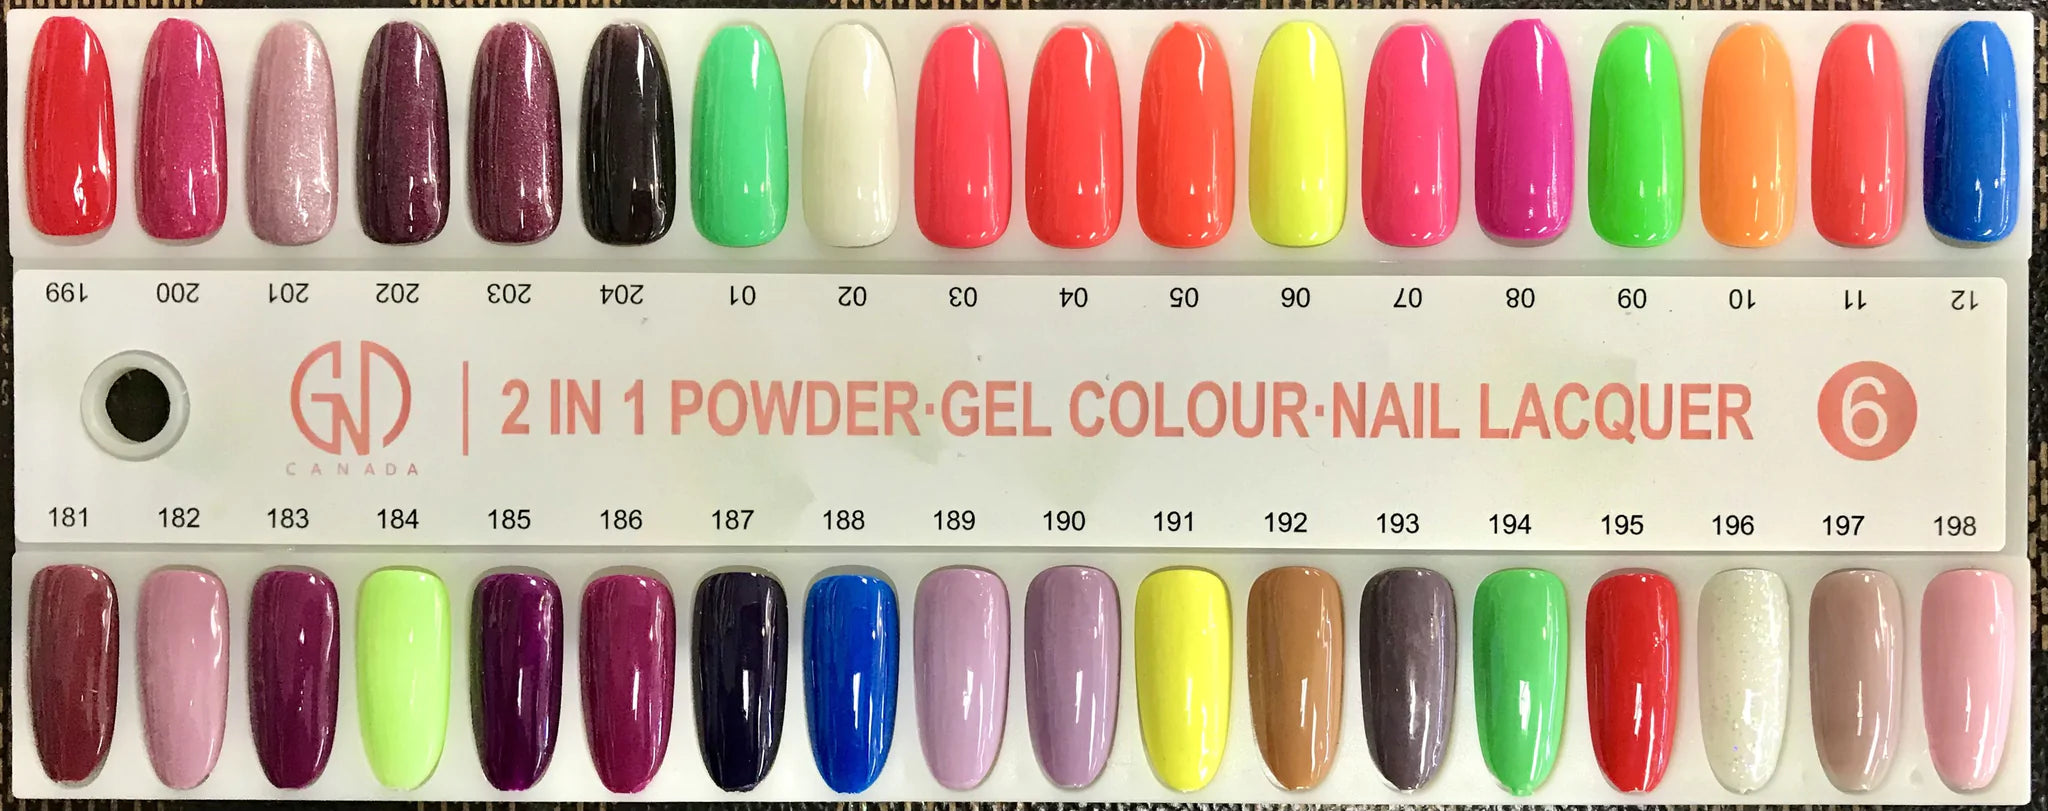 GND Duo Gel & Lacquer 194